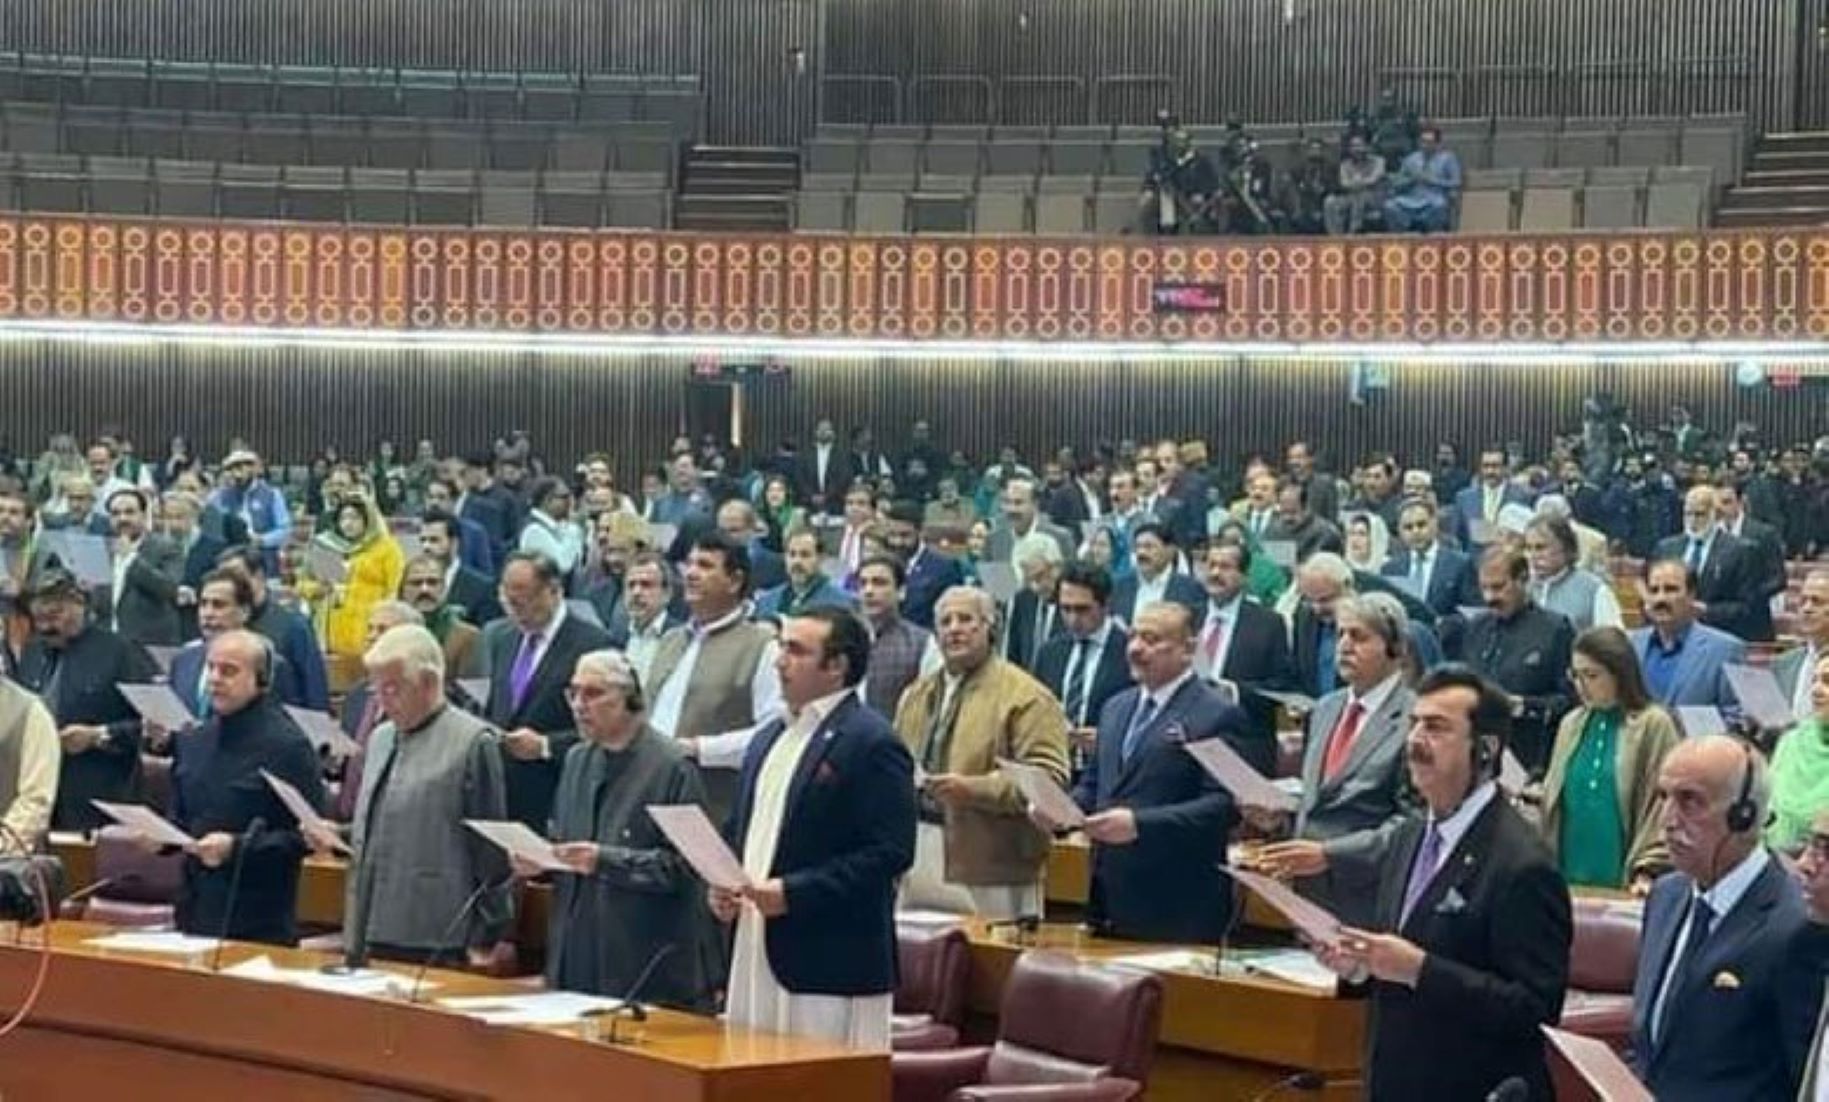 302 Lawmakers Take Oath In Inaugural Session Of Pakistan’s 16th National Assembly